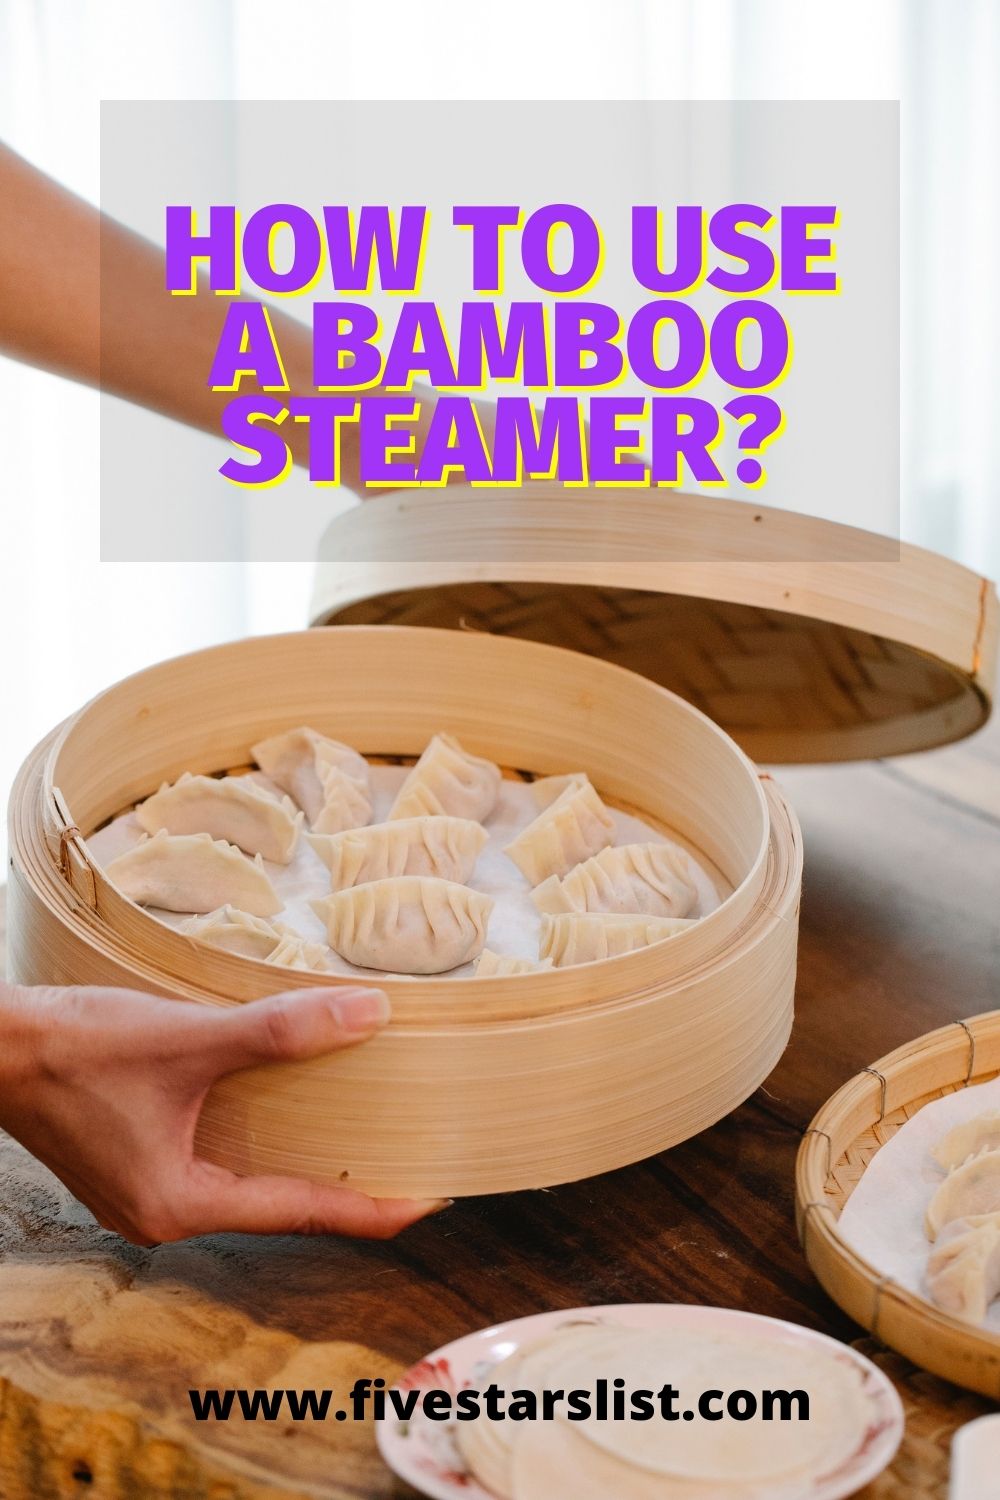 How to Use a Bamboo Steamer?